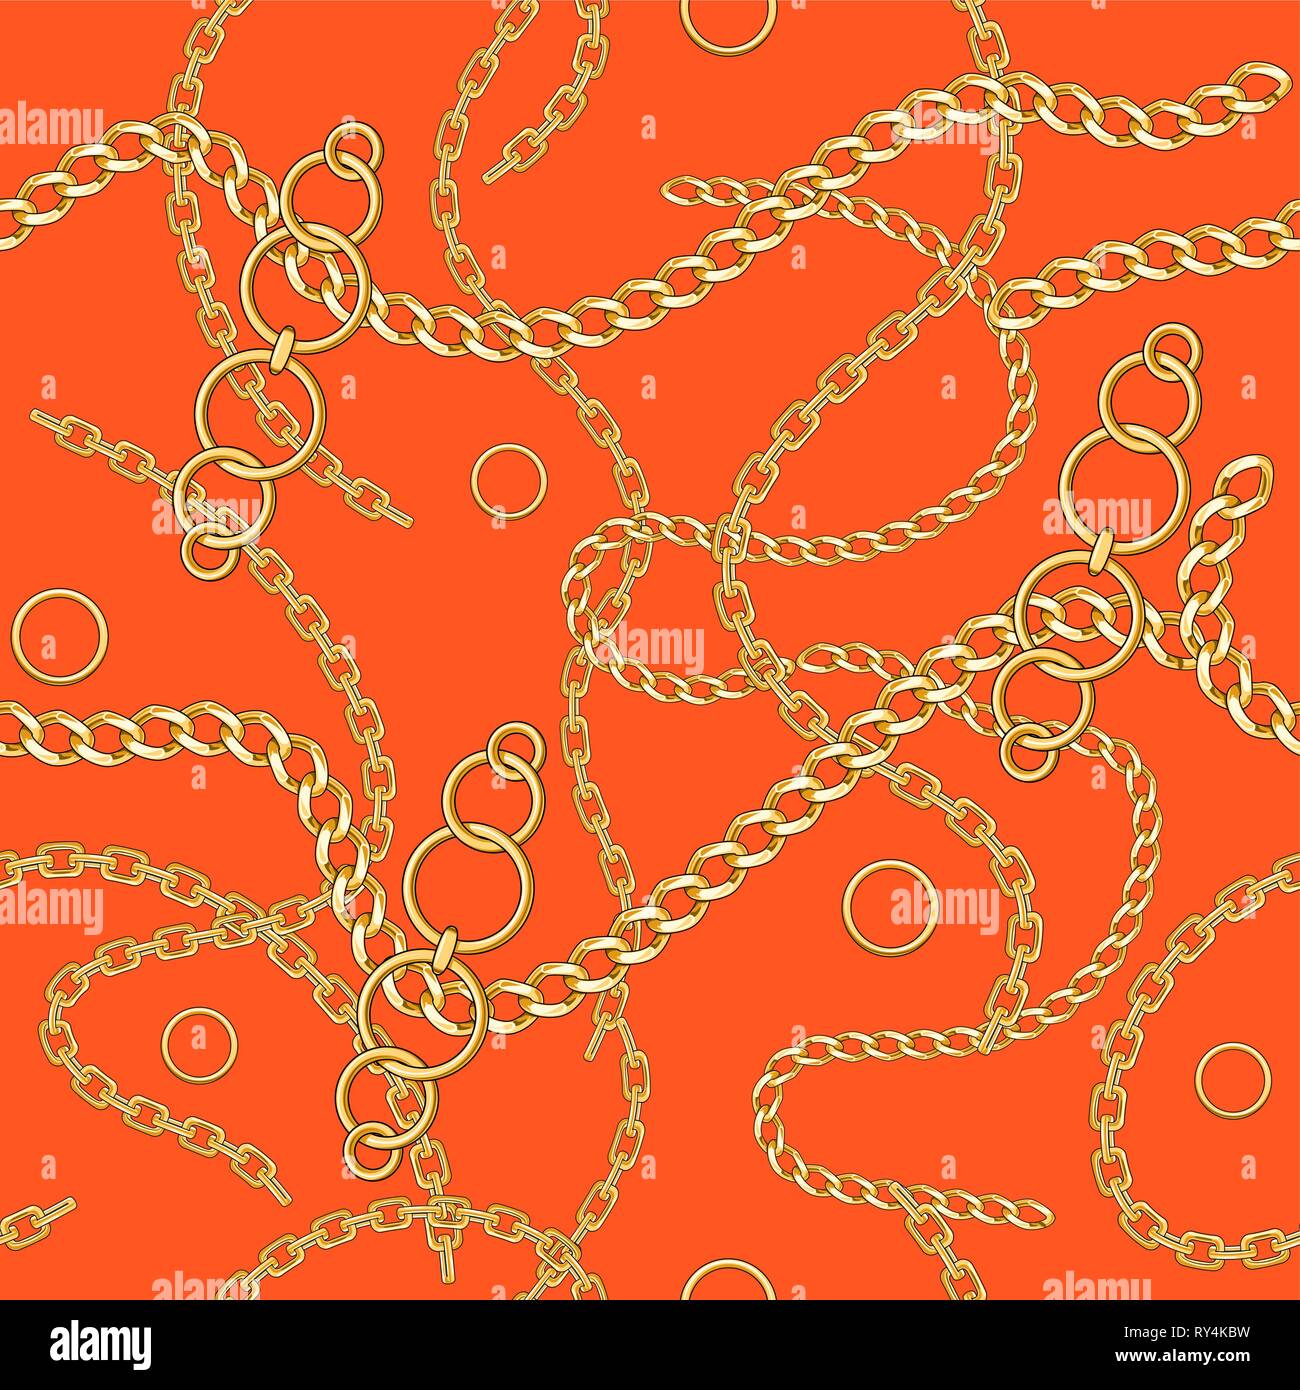 Abctract seamless pattern with chain on orange background for fabric. Trendy repeating background. Stock Vector